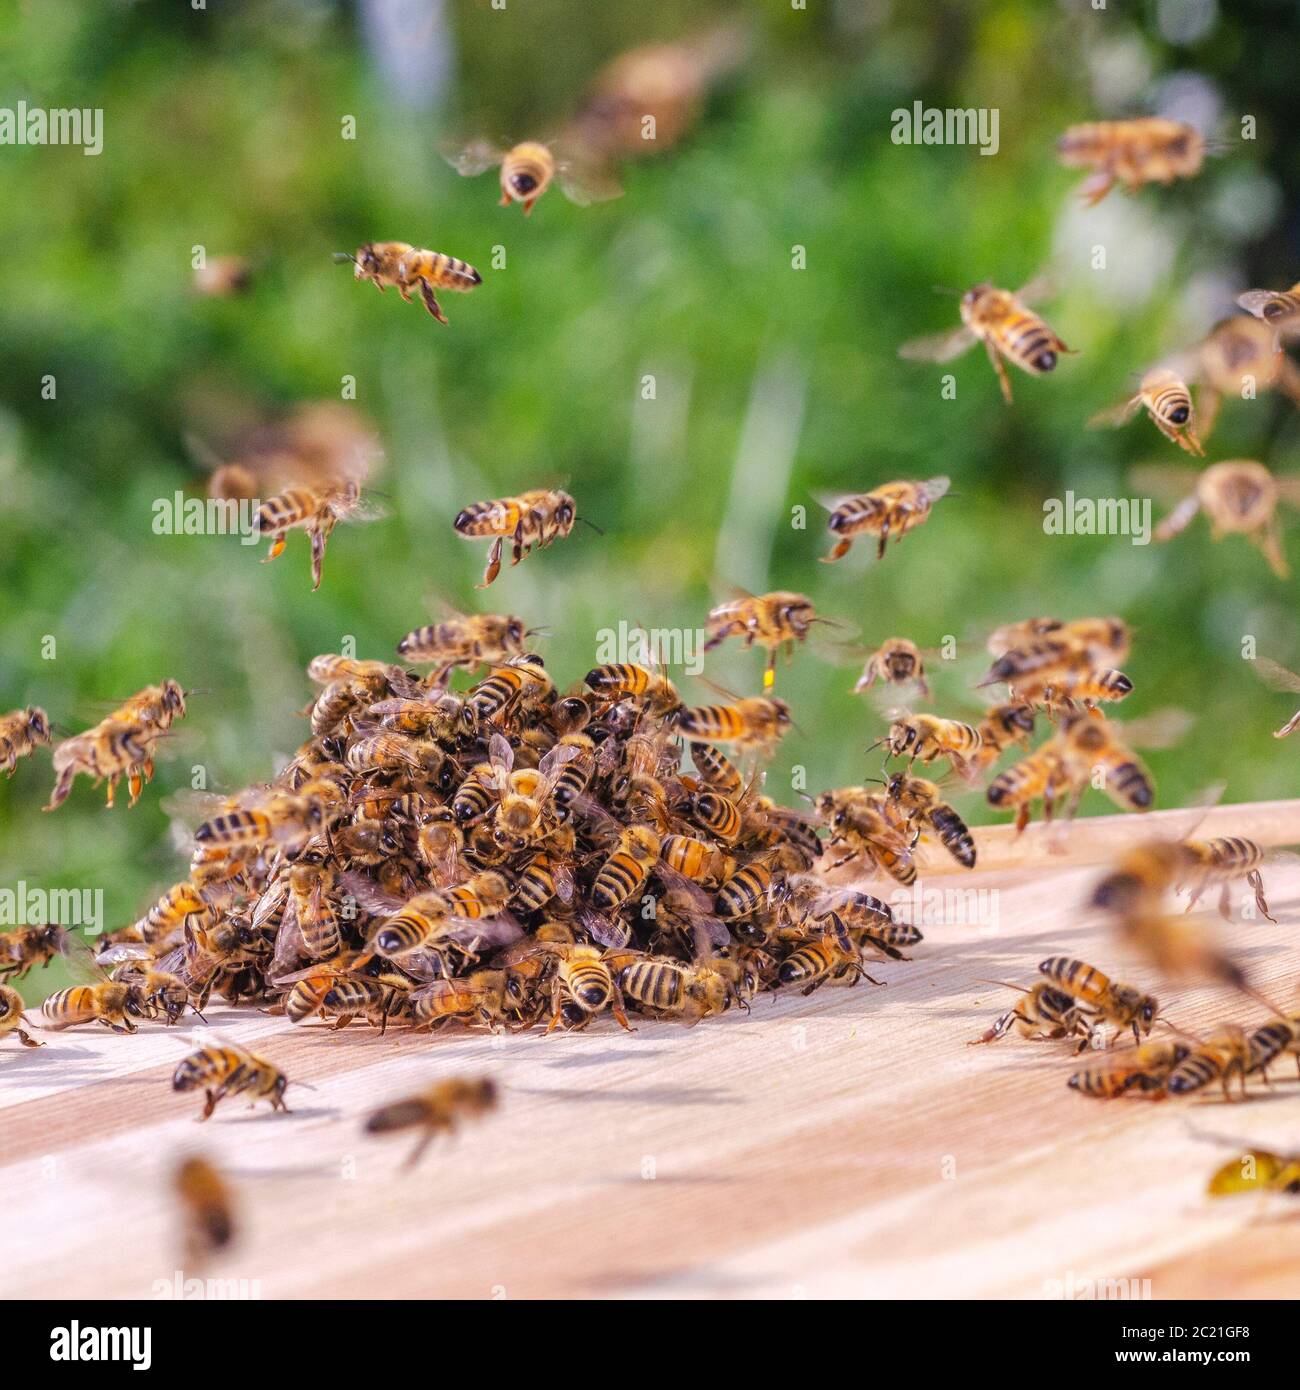 swarm of bees around a dipper soaked in honey in apiary Stock Photo